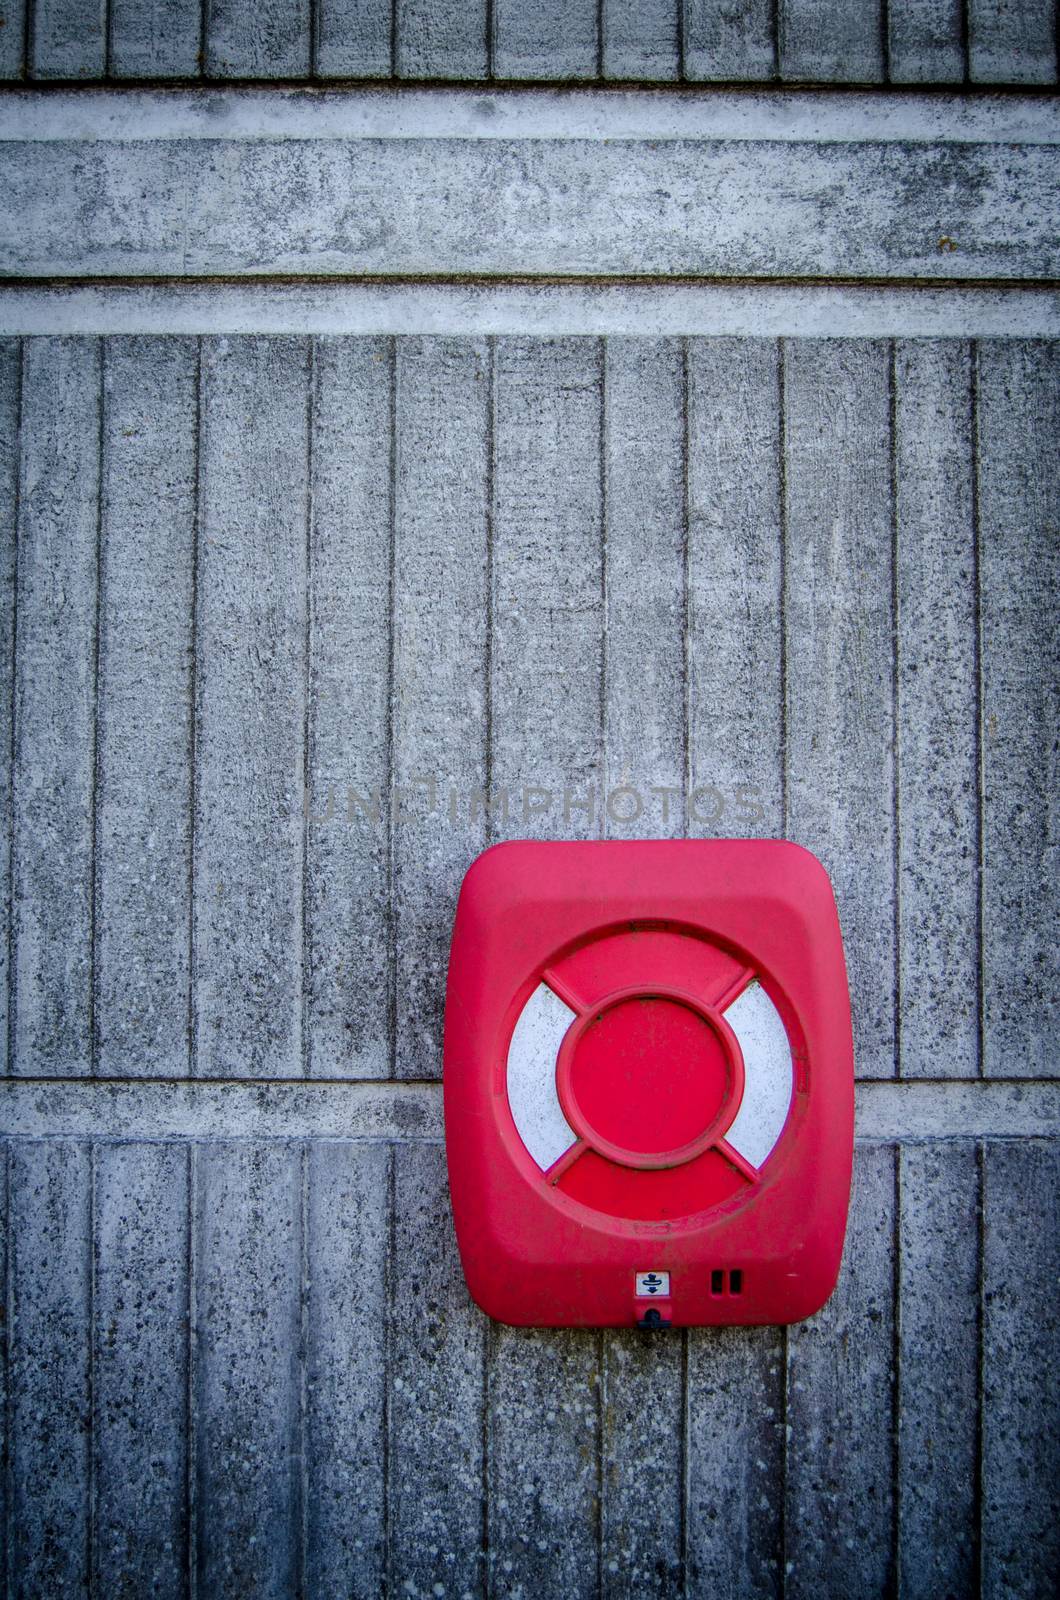 Grungy Red Life Preserver by mrdoomits